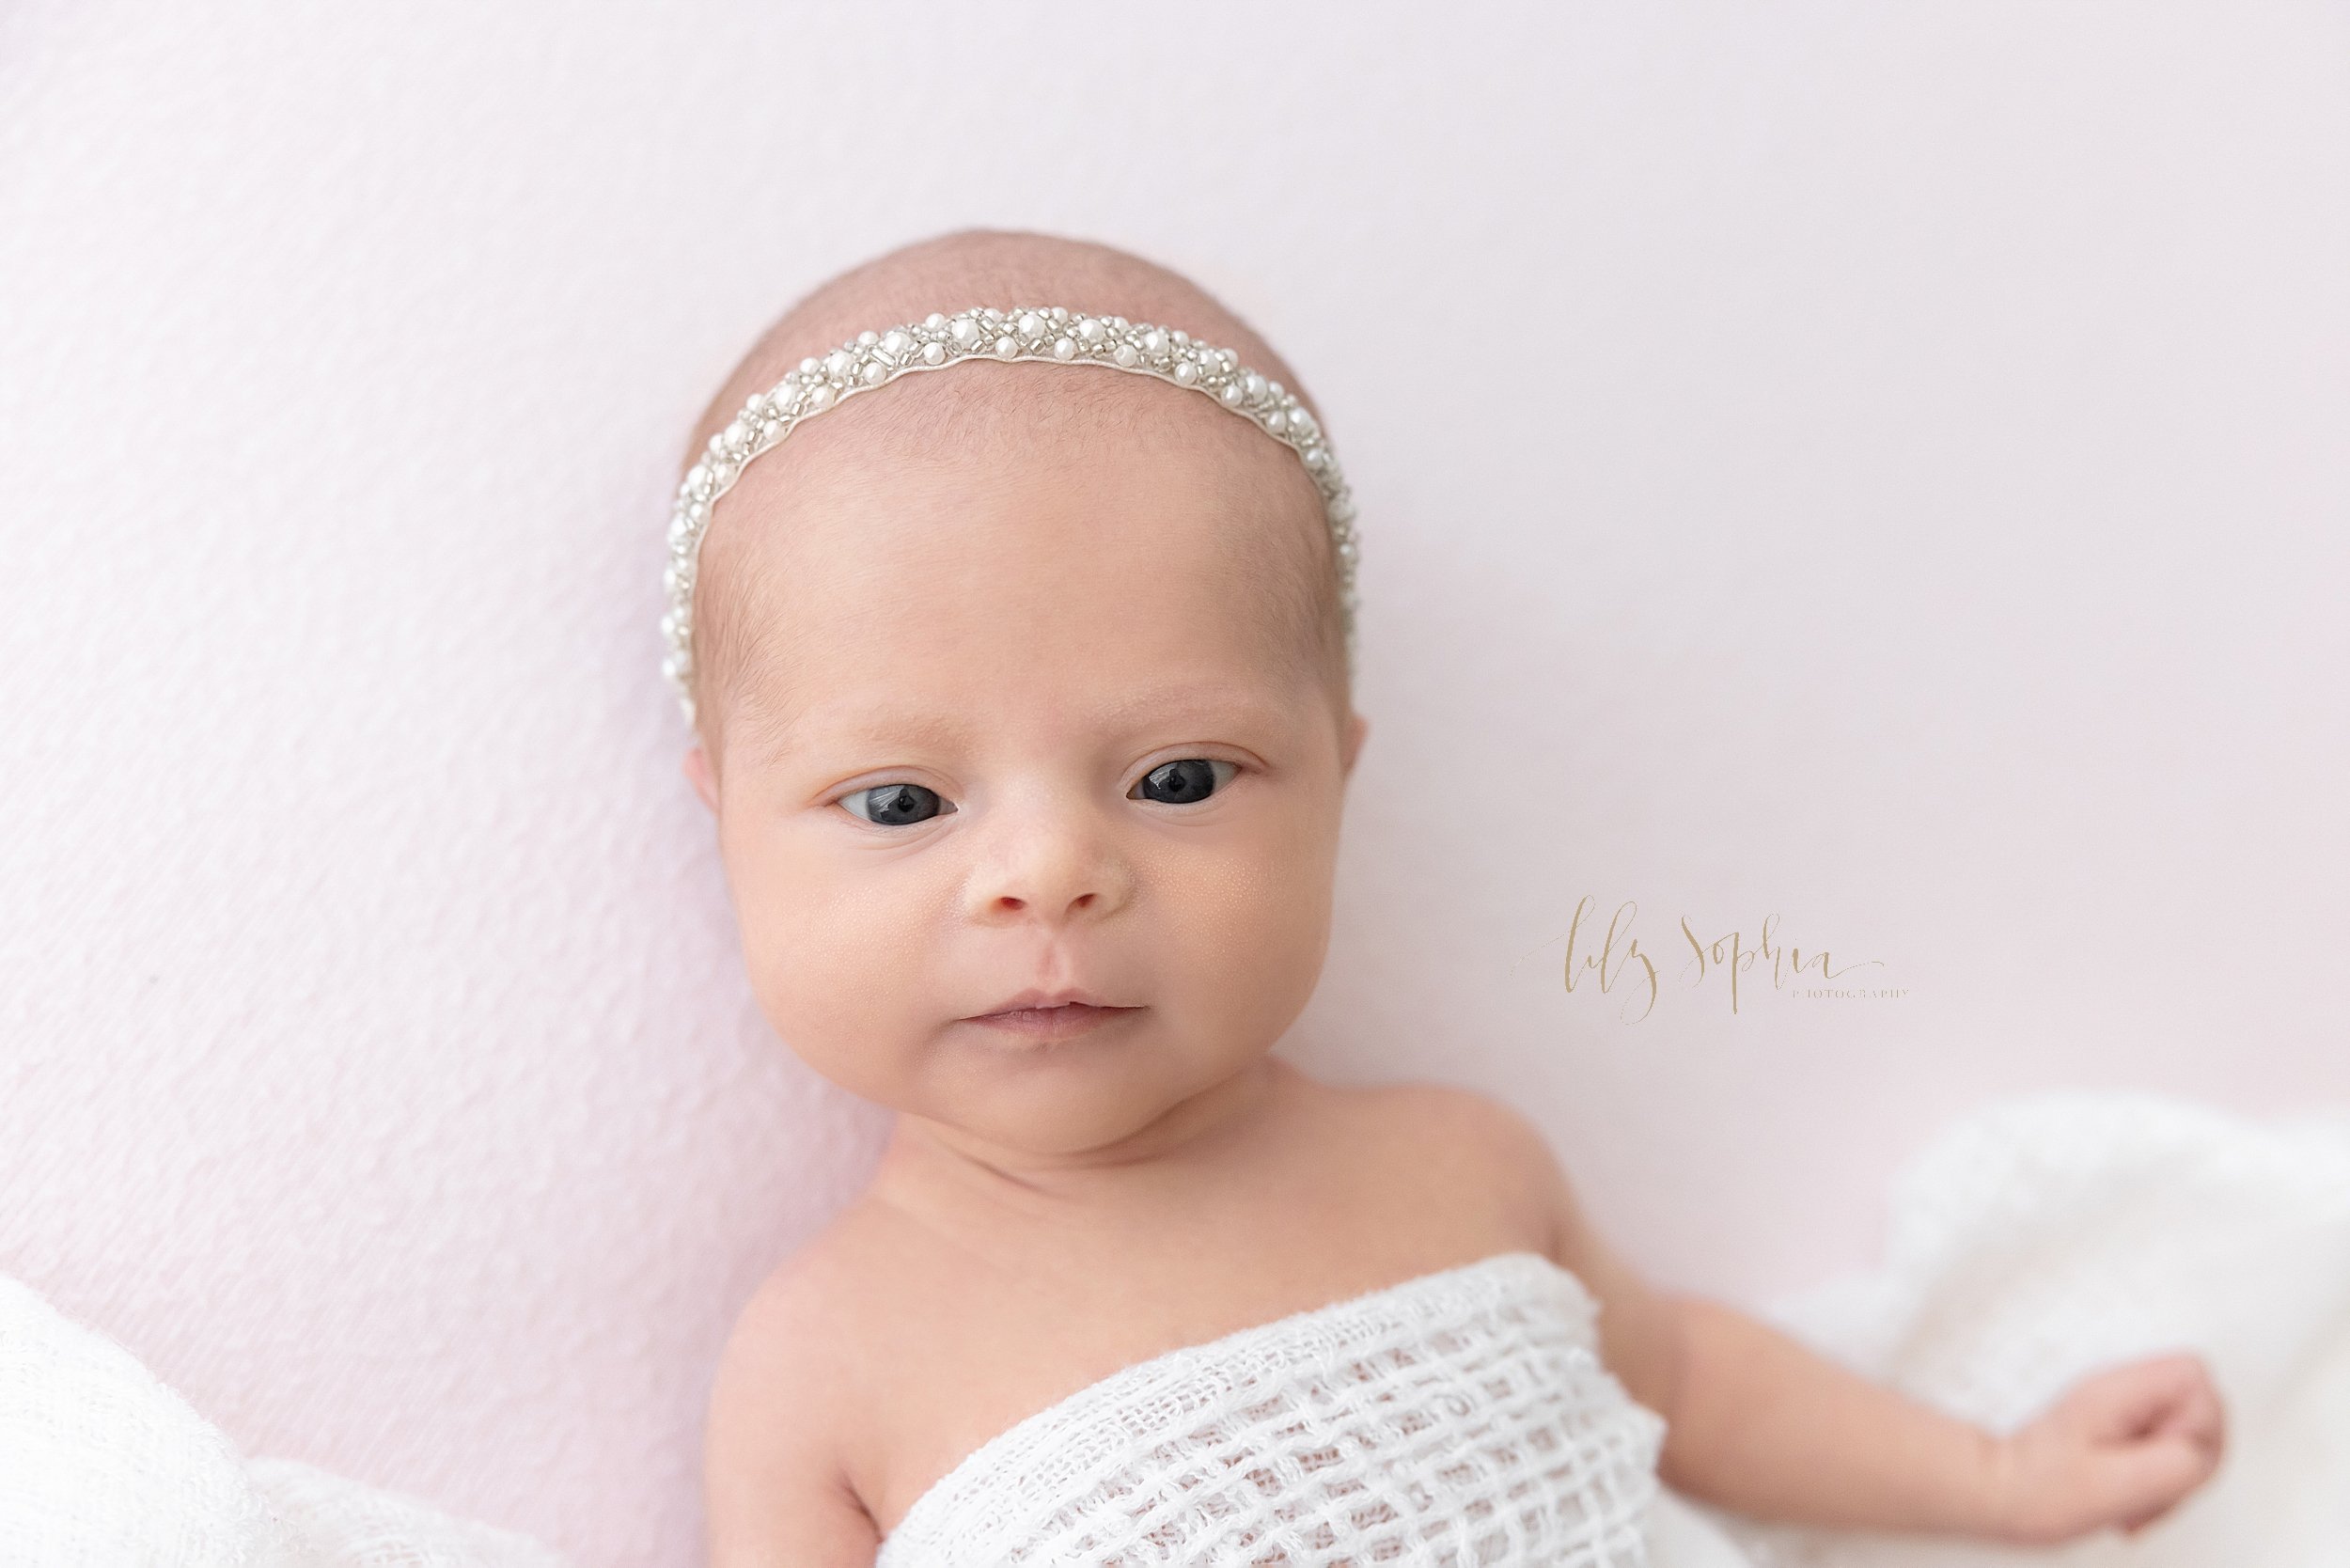  Newborn portrait of a wide awake newborn baby girl wrapped in a soft white knitted blanket and wearing a pearl headband on her head taken in a studio near Kirkwood in Atlanta that uses natural light. 